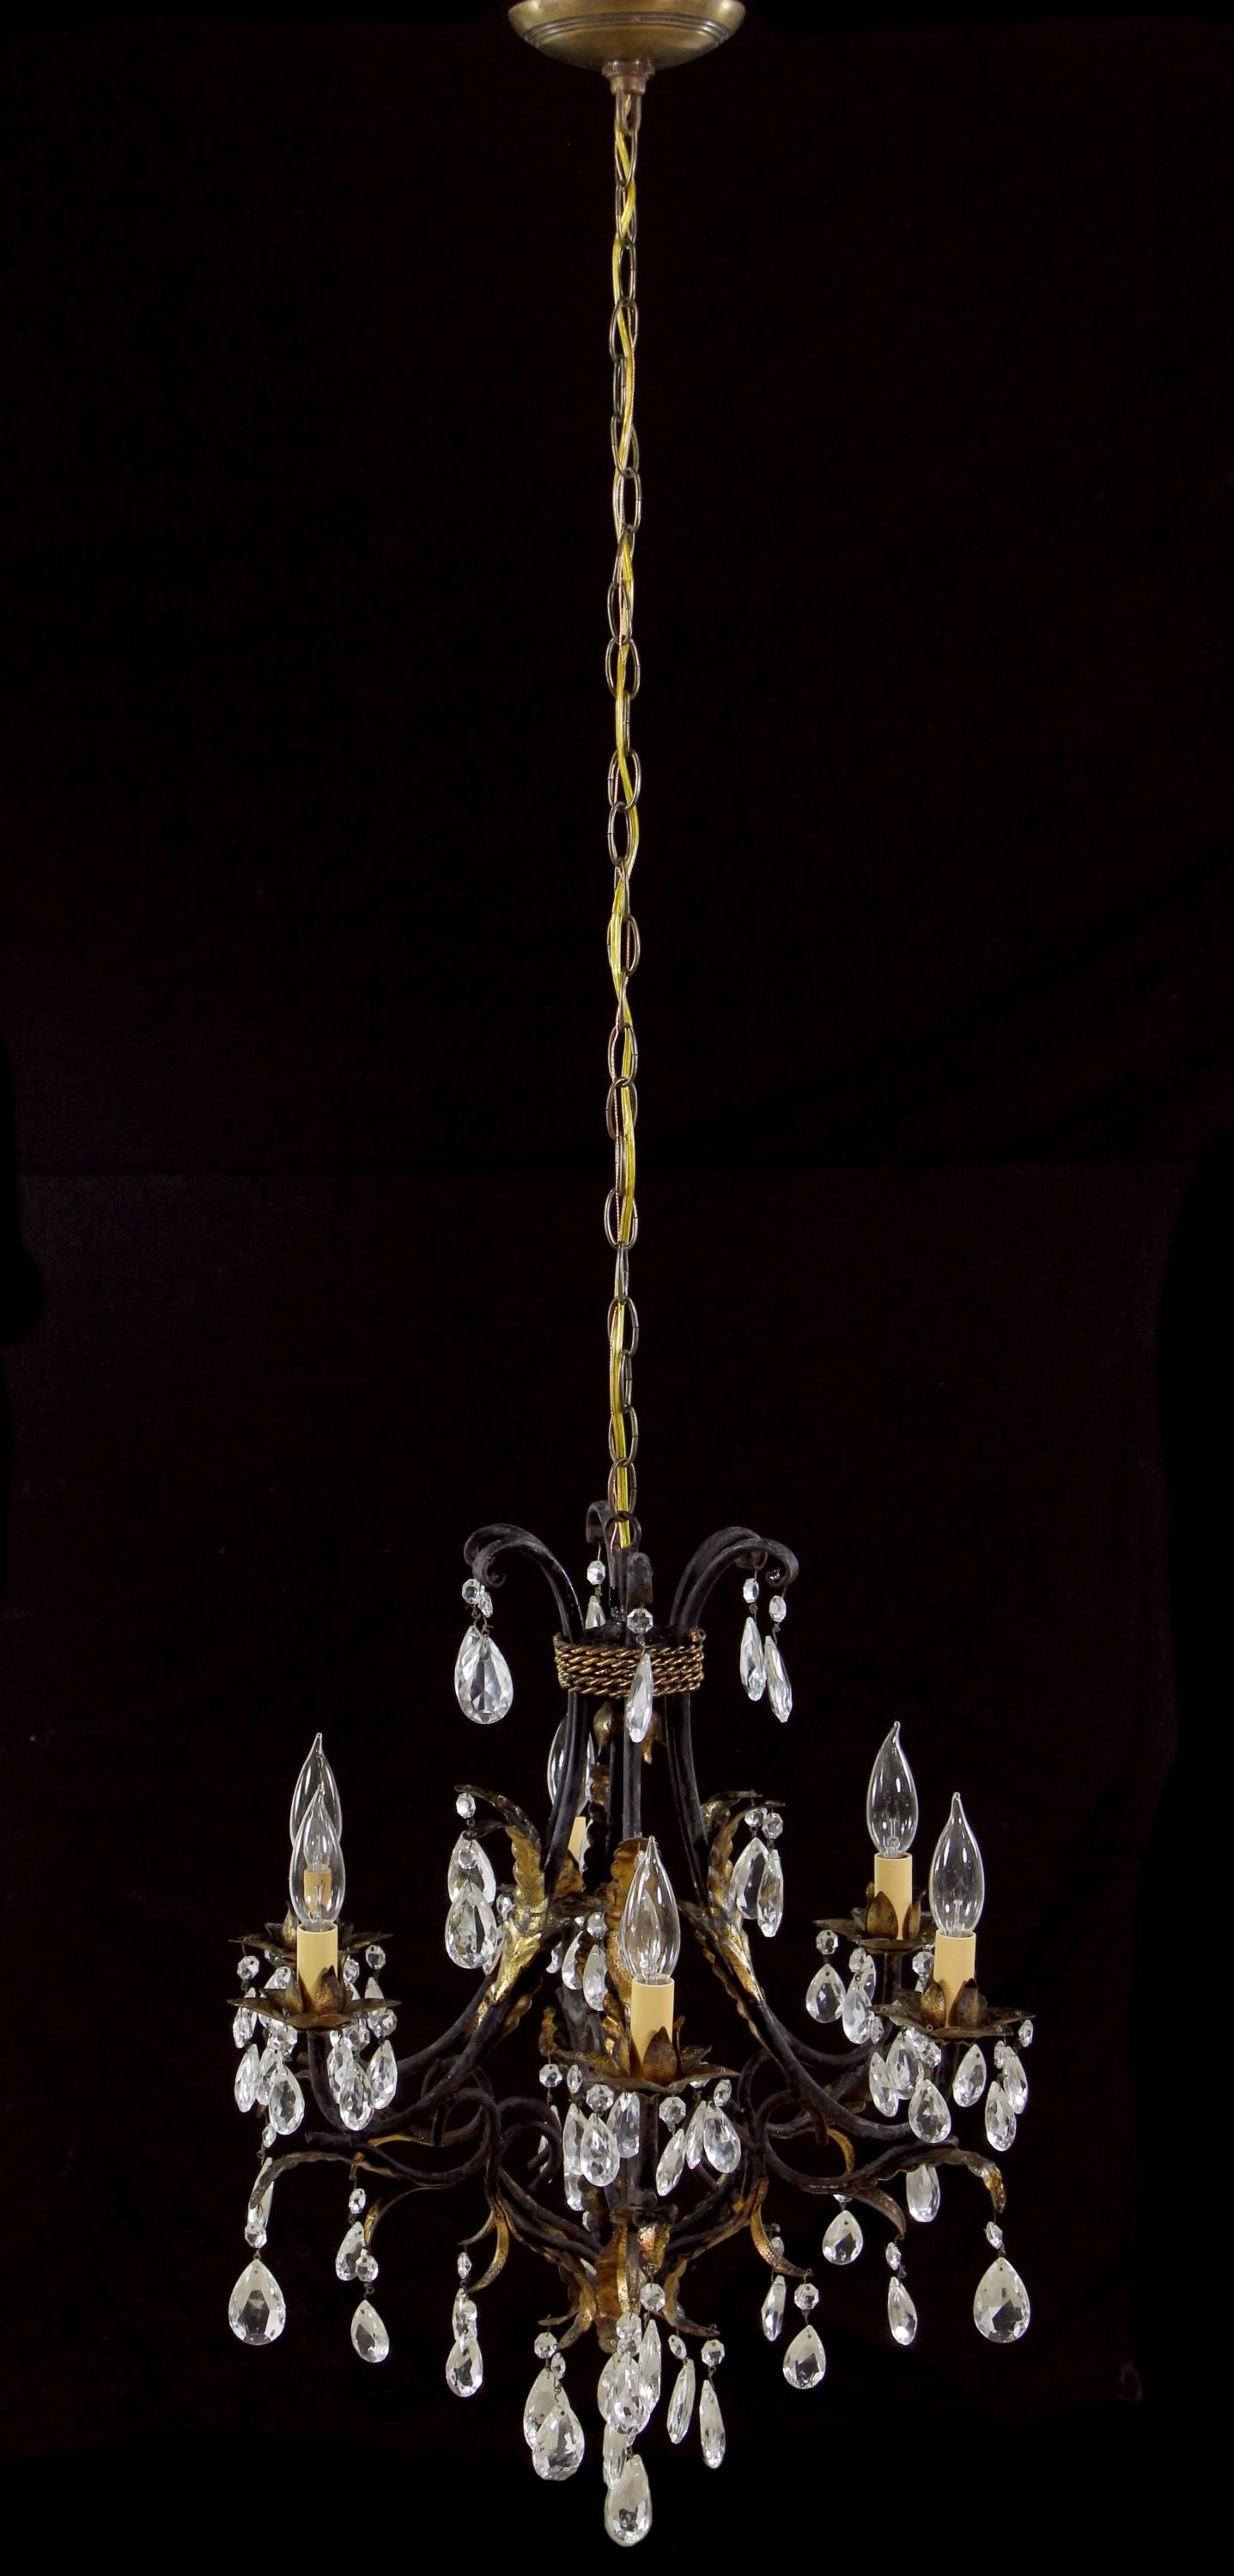 Early 20th Century Tole chandelier. Featuring black finish with gold gilt leaves and vines and ropes details. Six arms dripping with crystals. Cleaned and rewired. Please note, this item is located in our Los Angeles location.